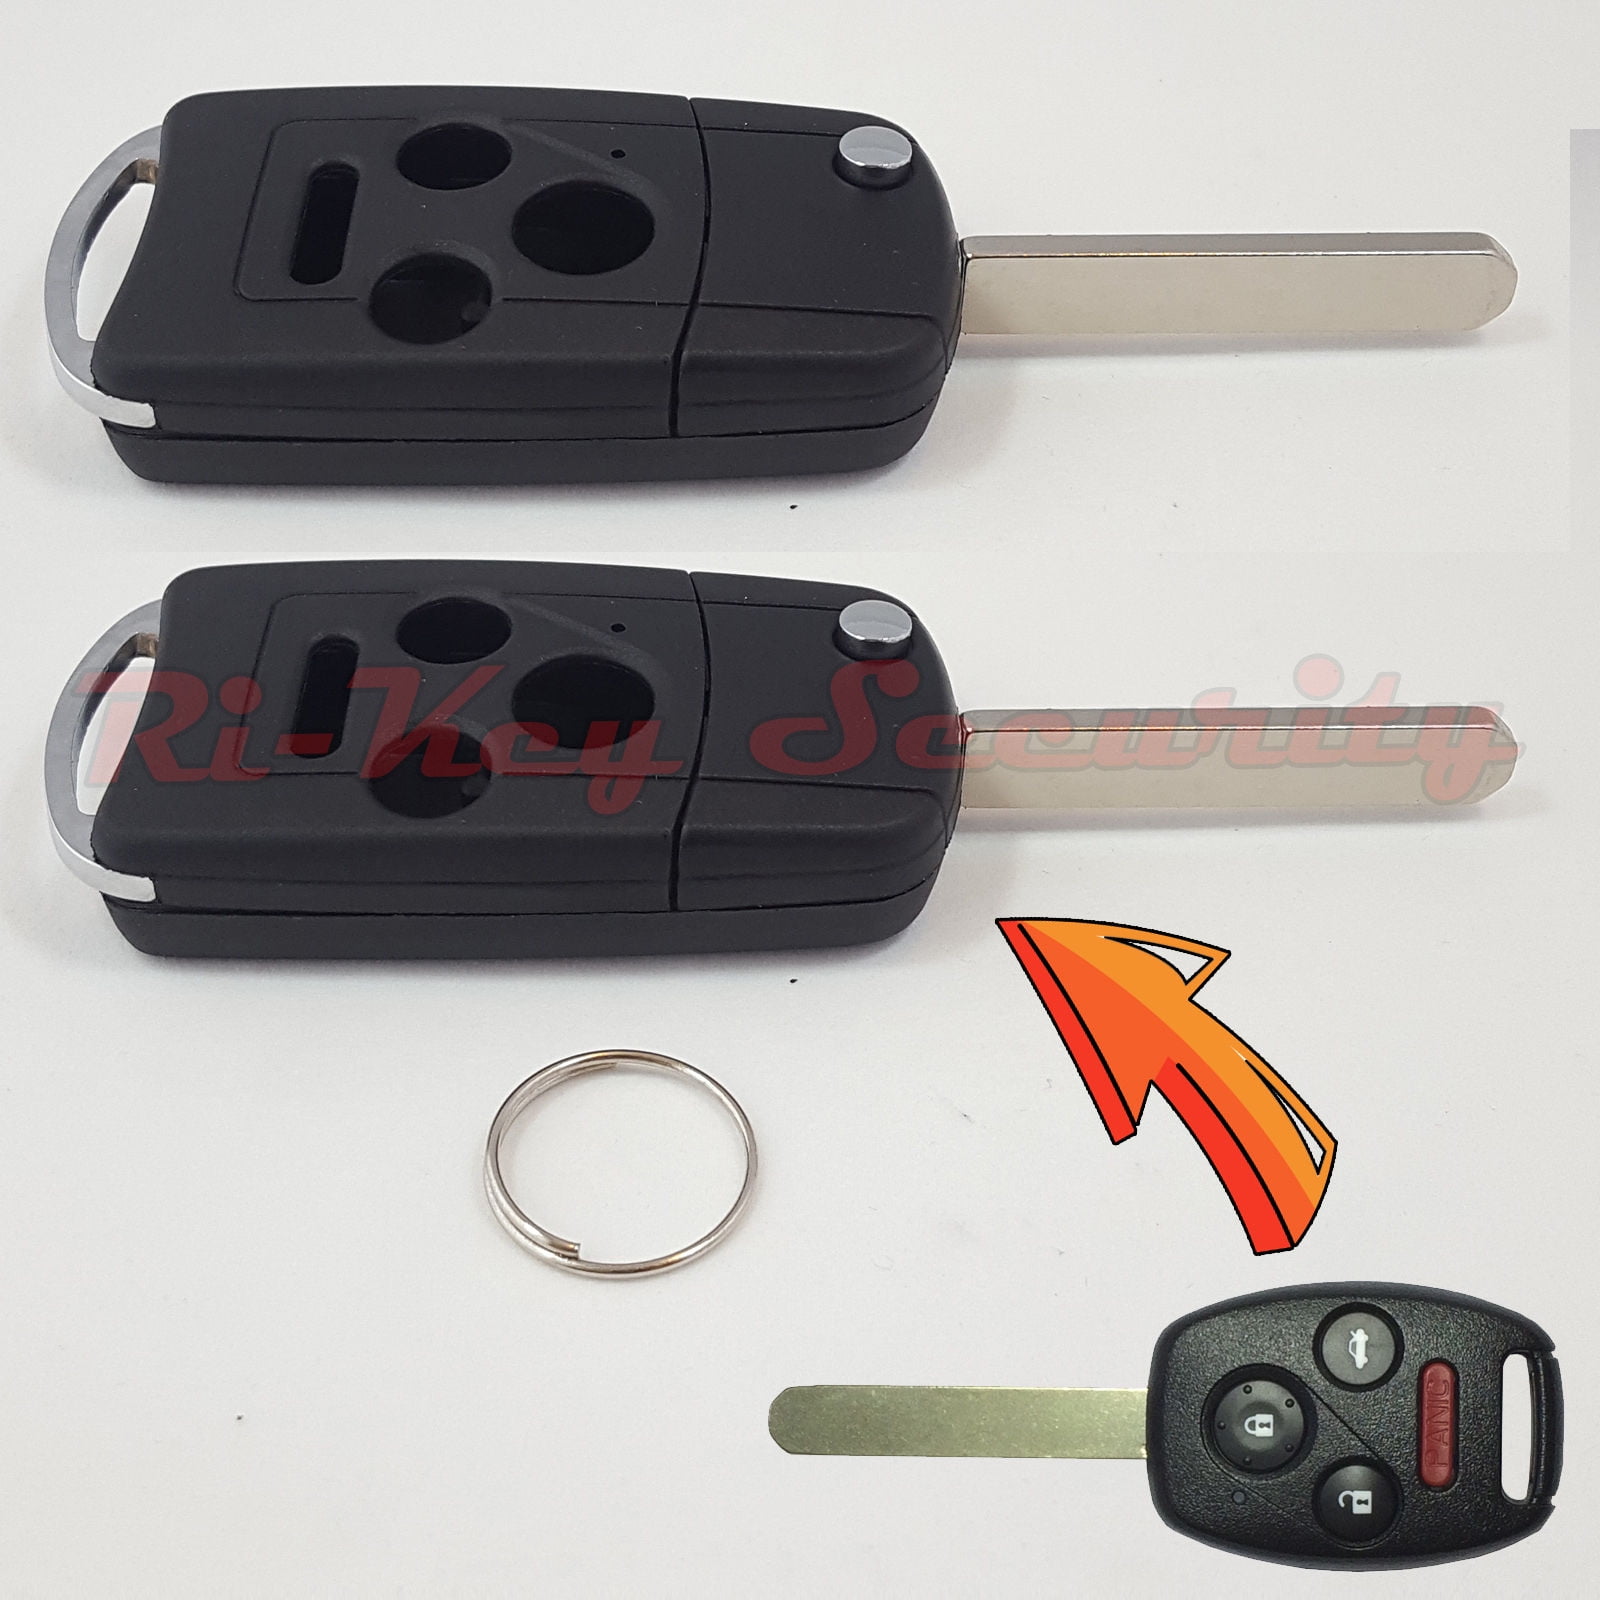 Modified Flip Remote Key Shell Case for Honda Civic CR-V Accord Fob 4 Buttons